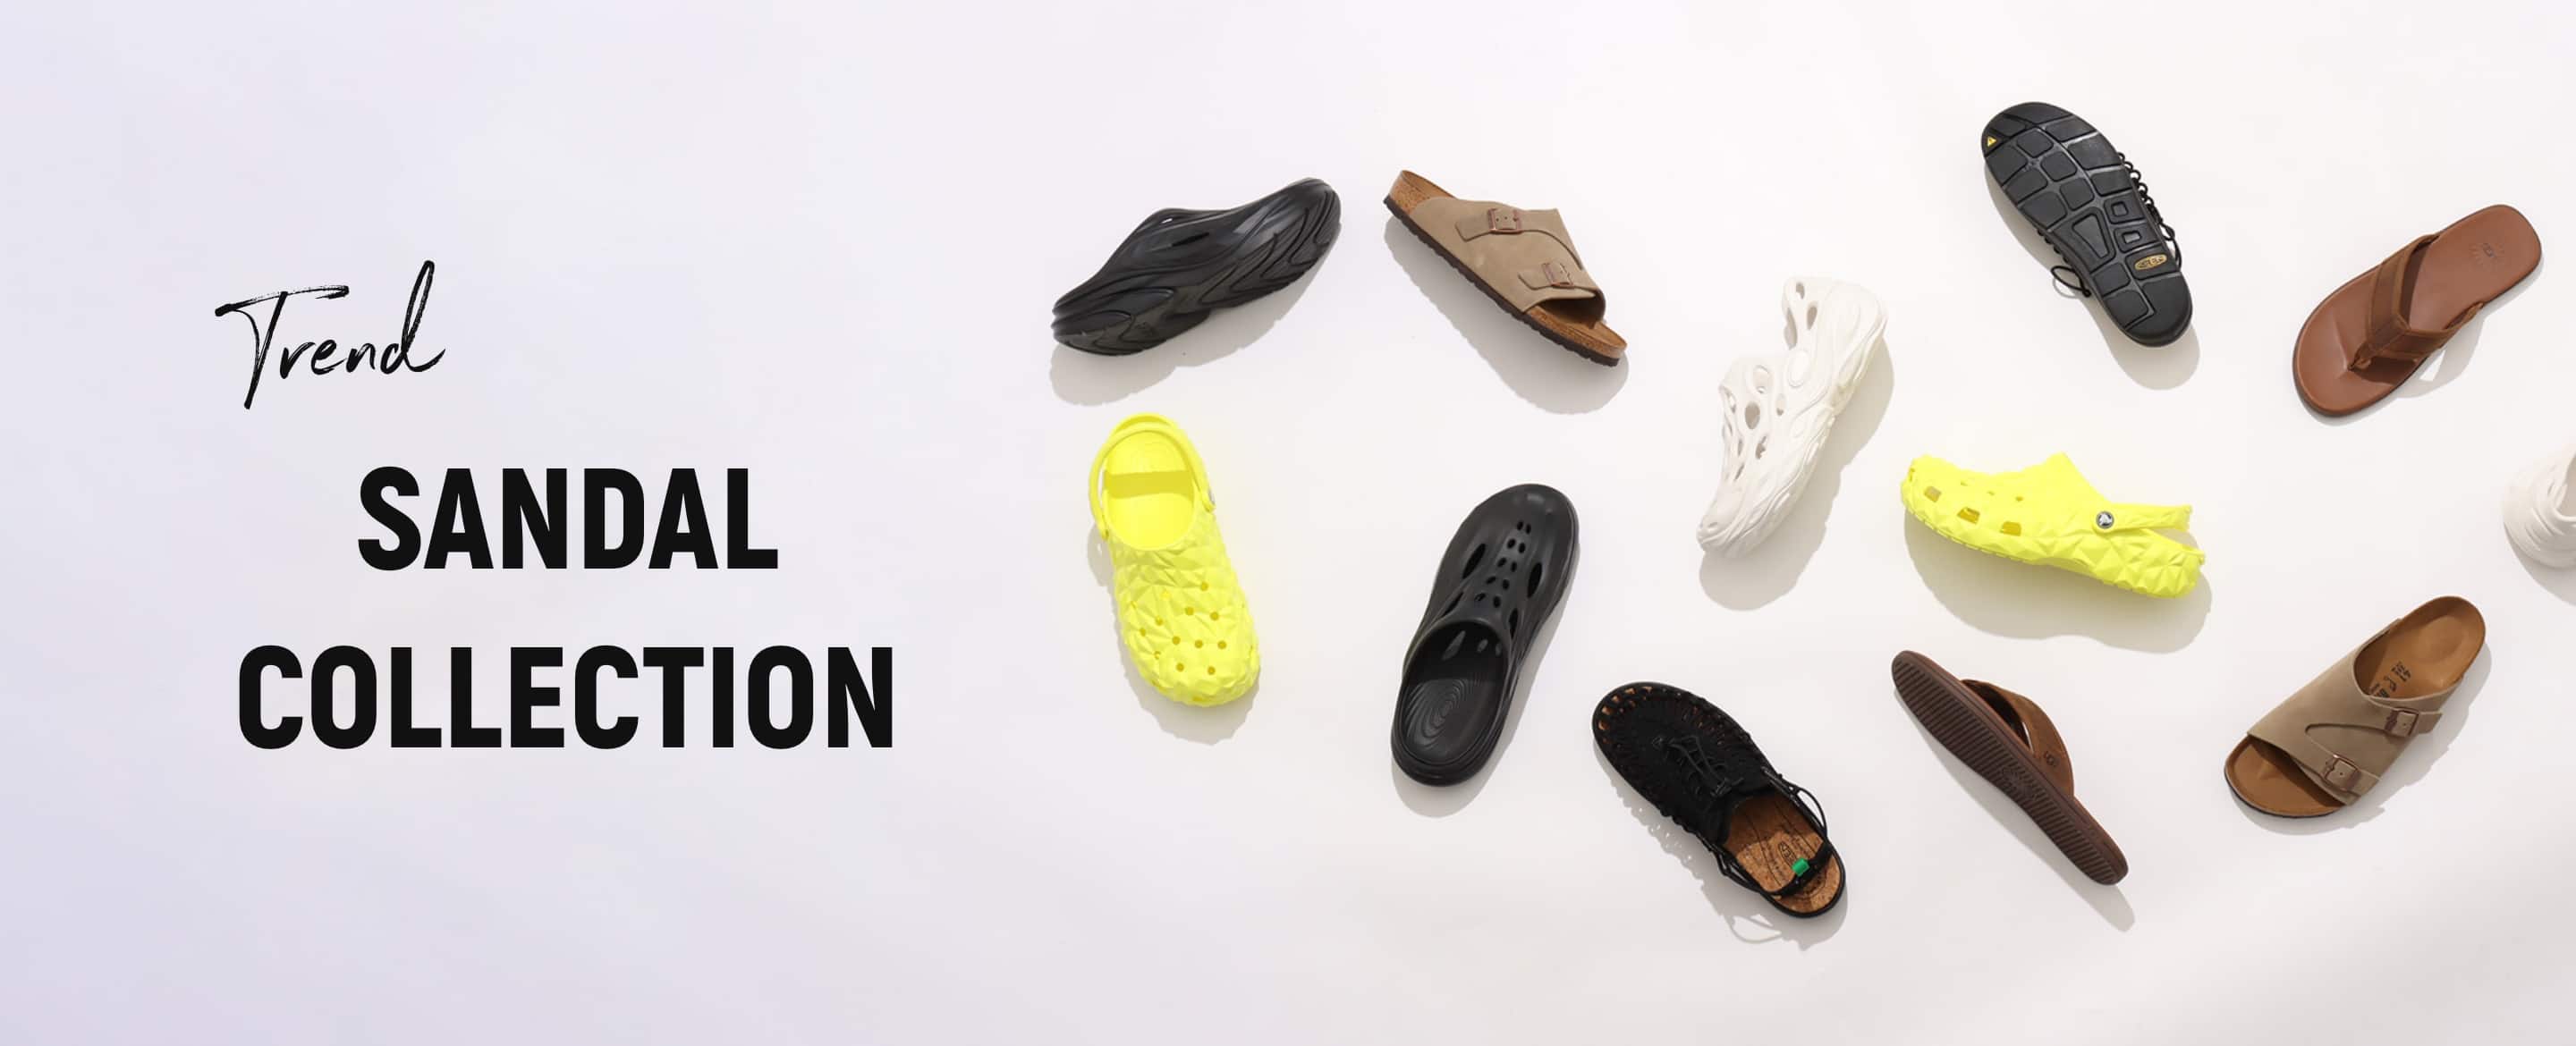 "TREND SANDAL COLLECTION"